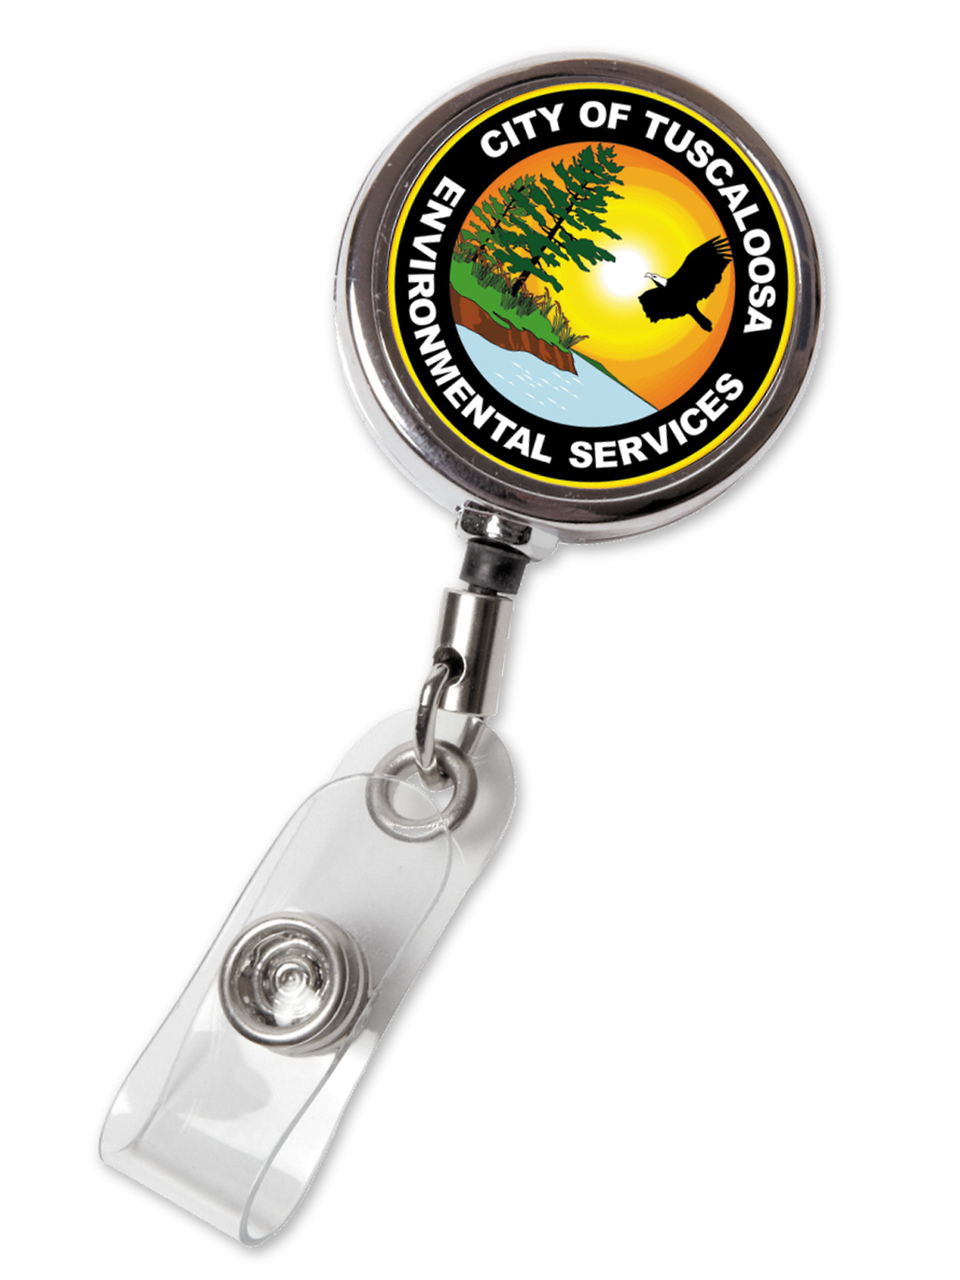 Black /Chrome Heavy-Duty badge Reel with Link Chain Reinforced